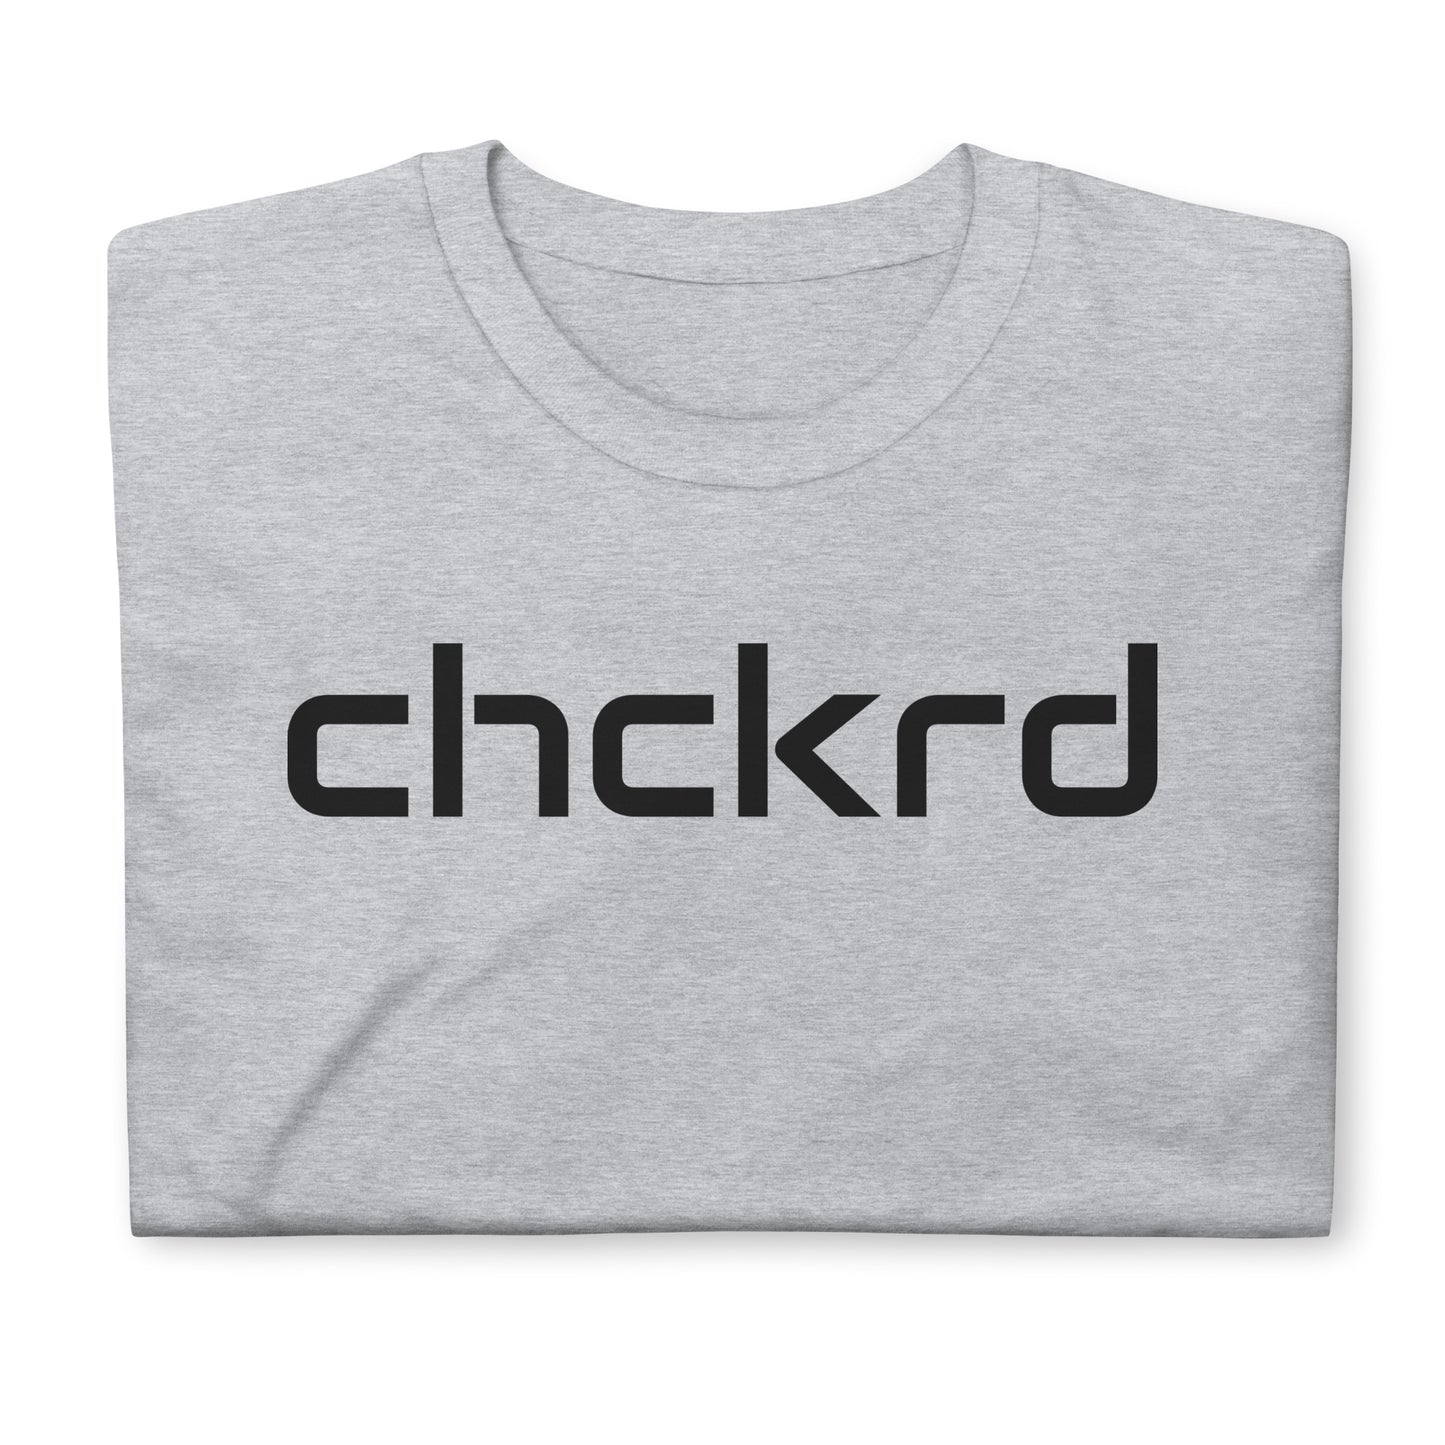 chckrd Pits & Stands T-Shirt Too